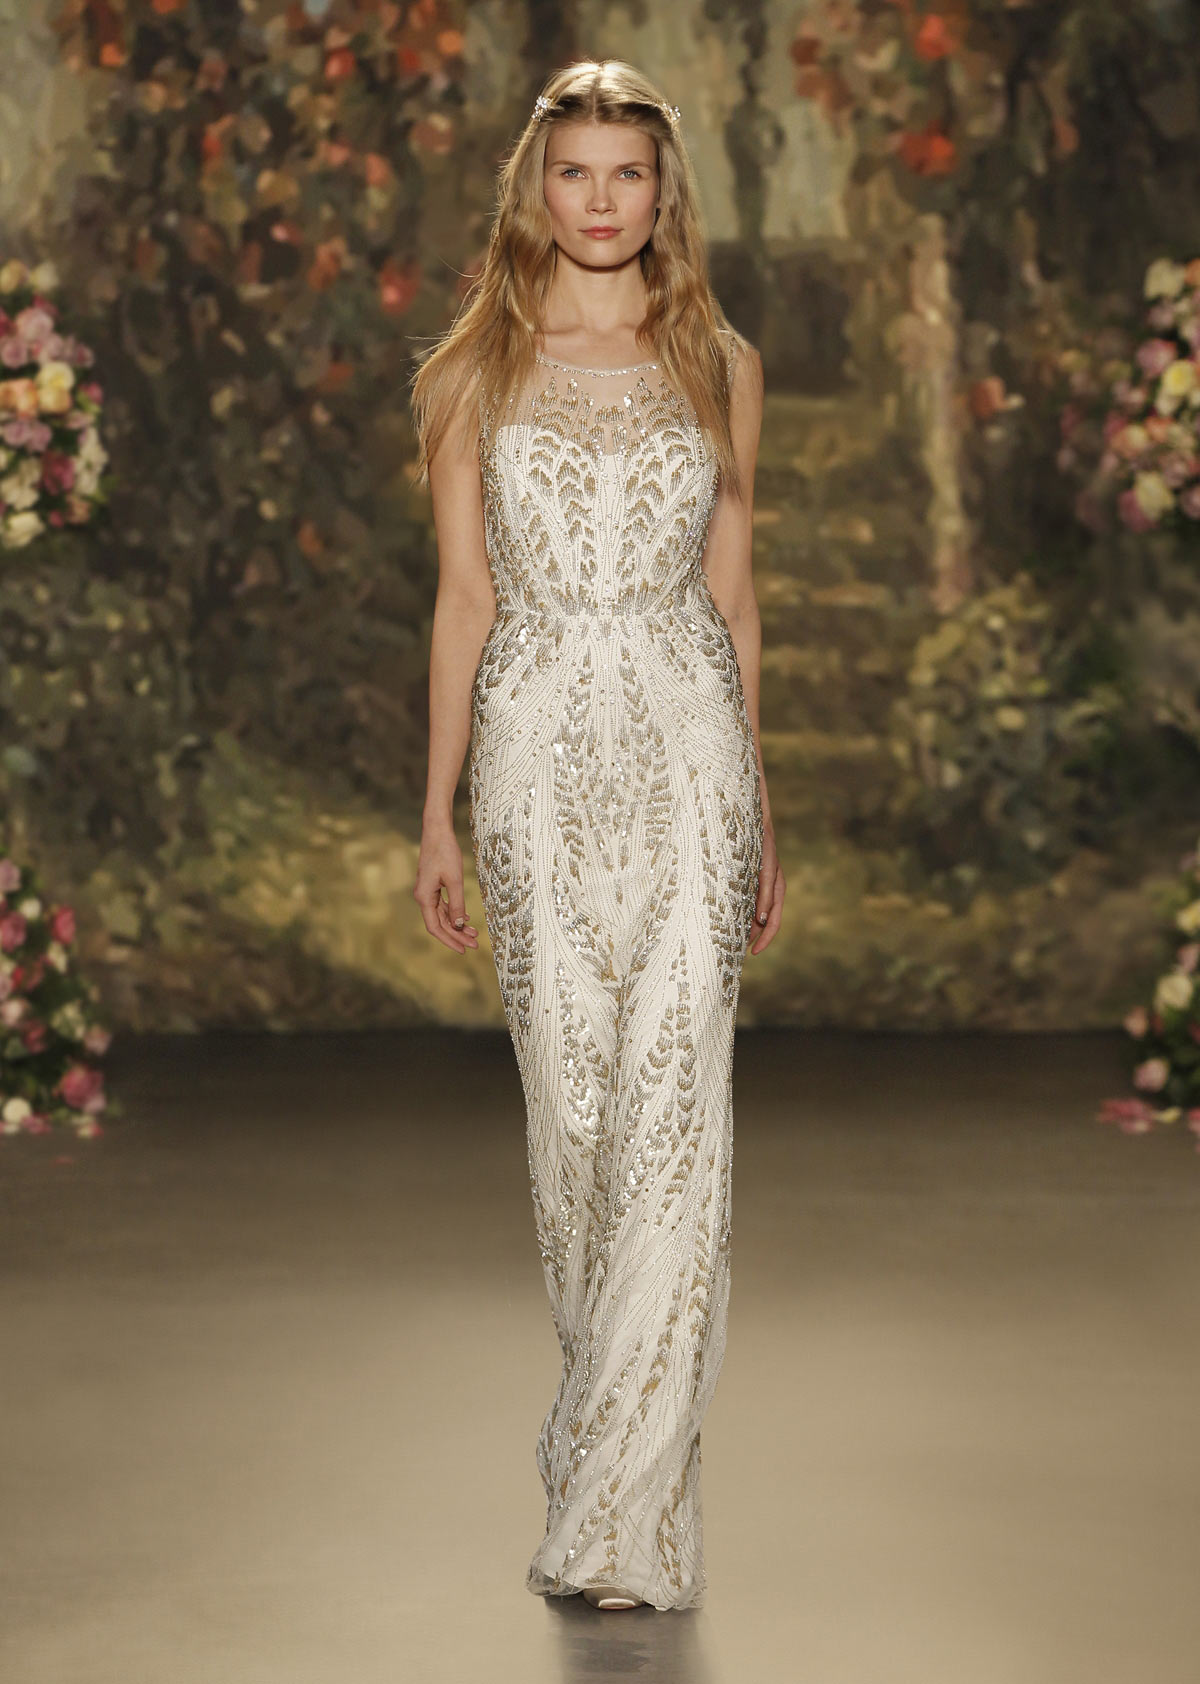 Jenny Packham & LouLou Bridal arrive at The Bridal House of Cornwall